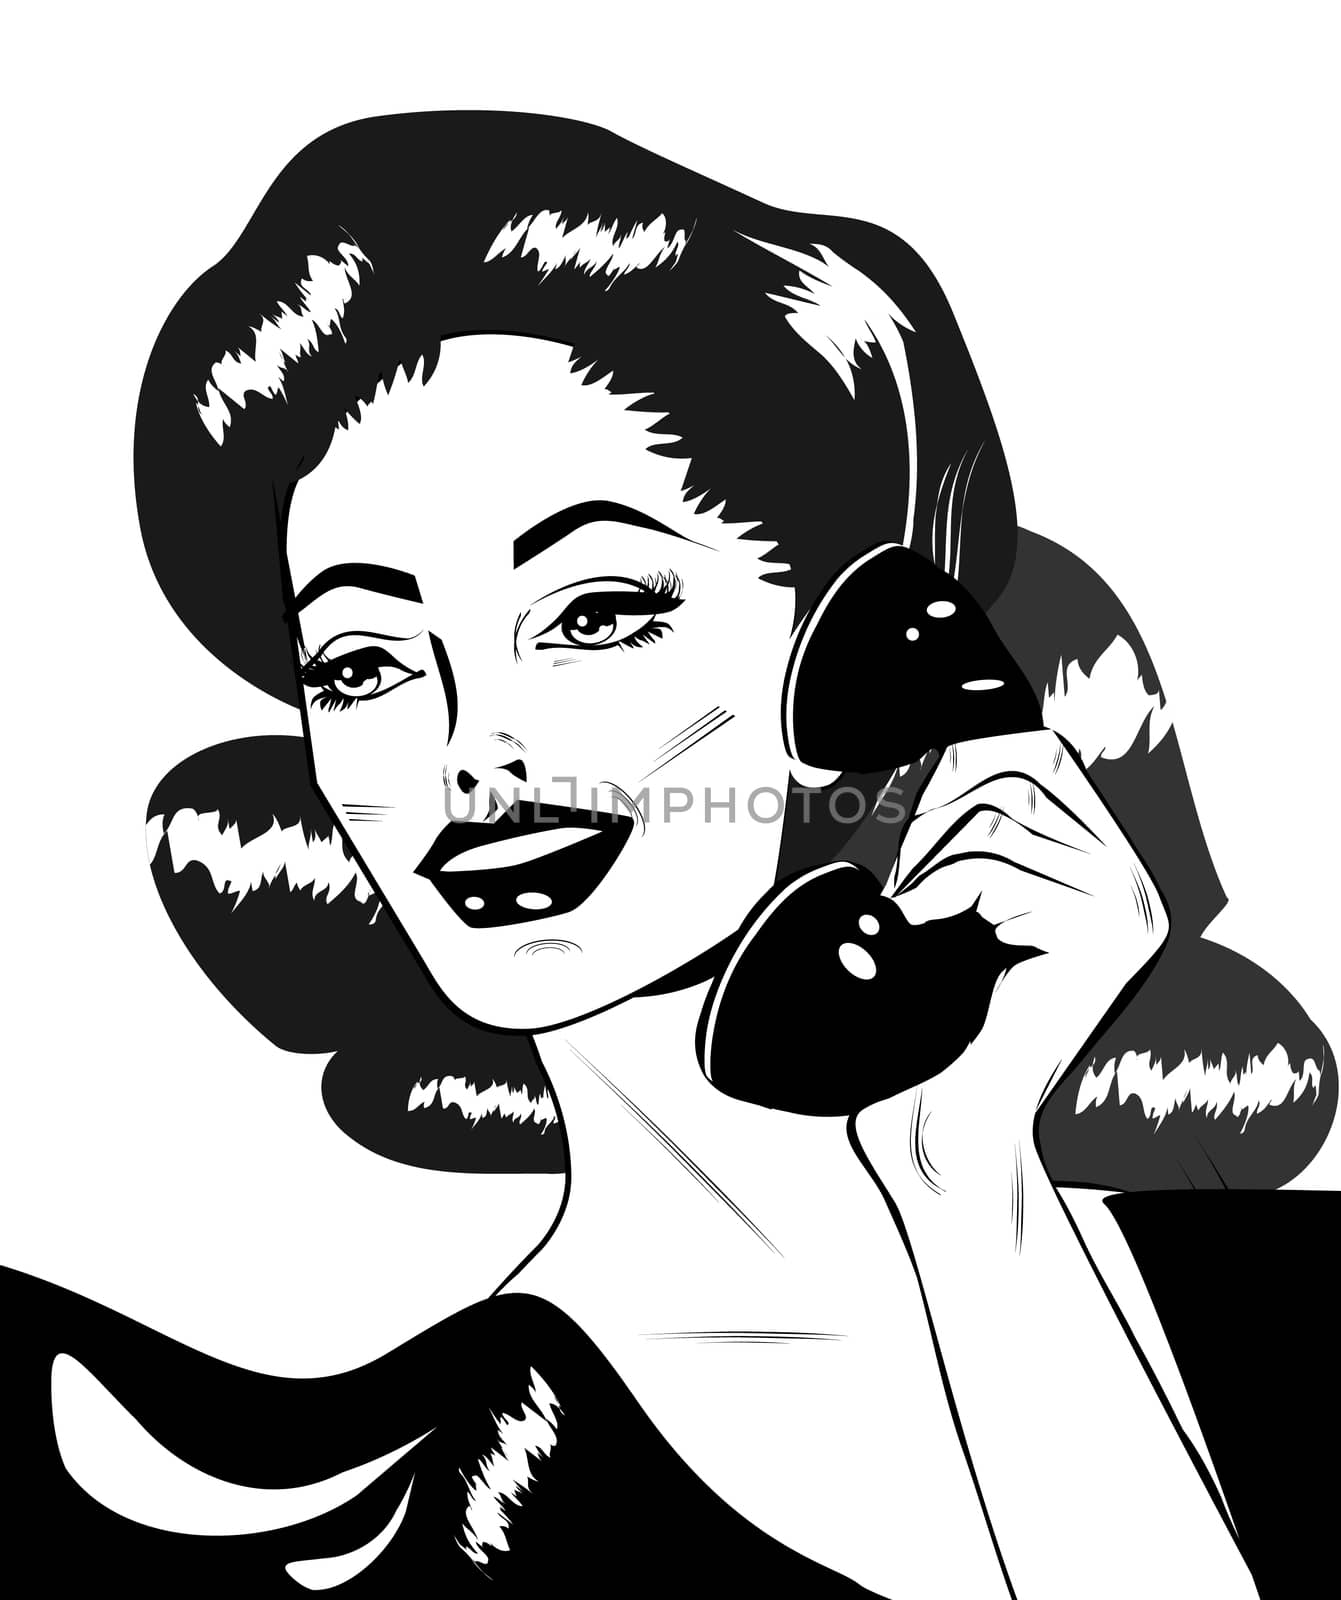 Lady Chatting On The Phone - Retro Clip Art  by IconsJewelry